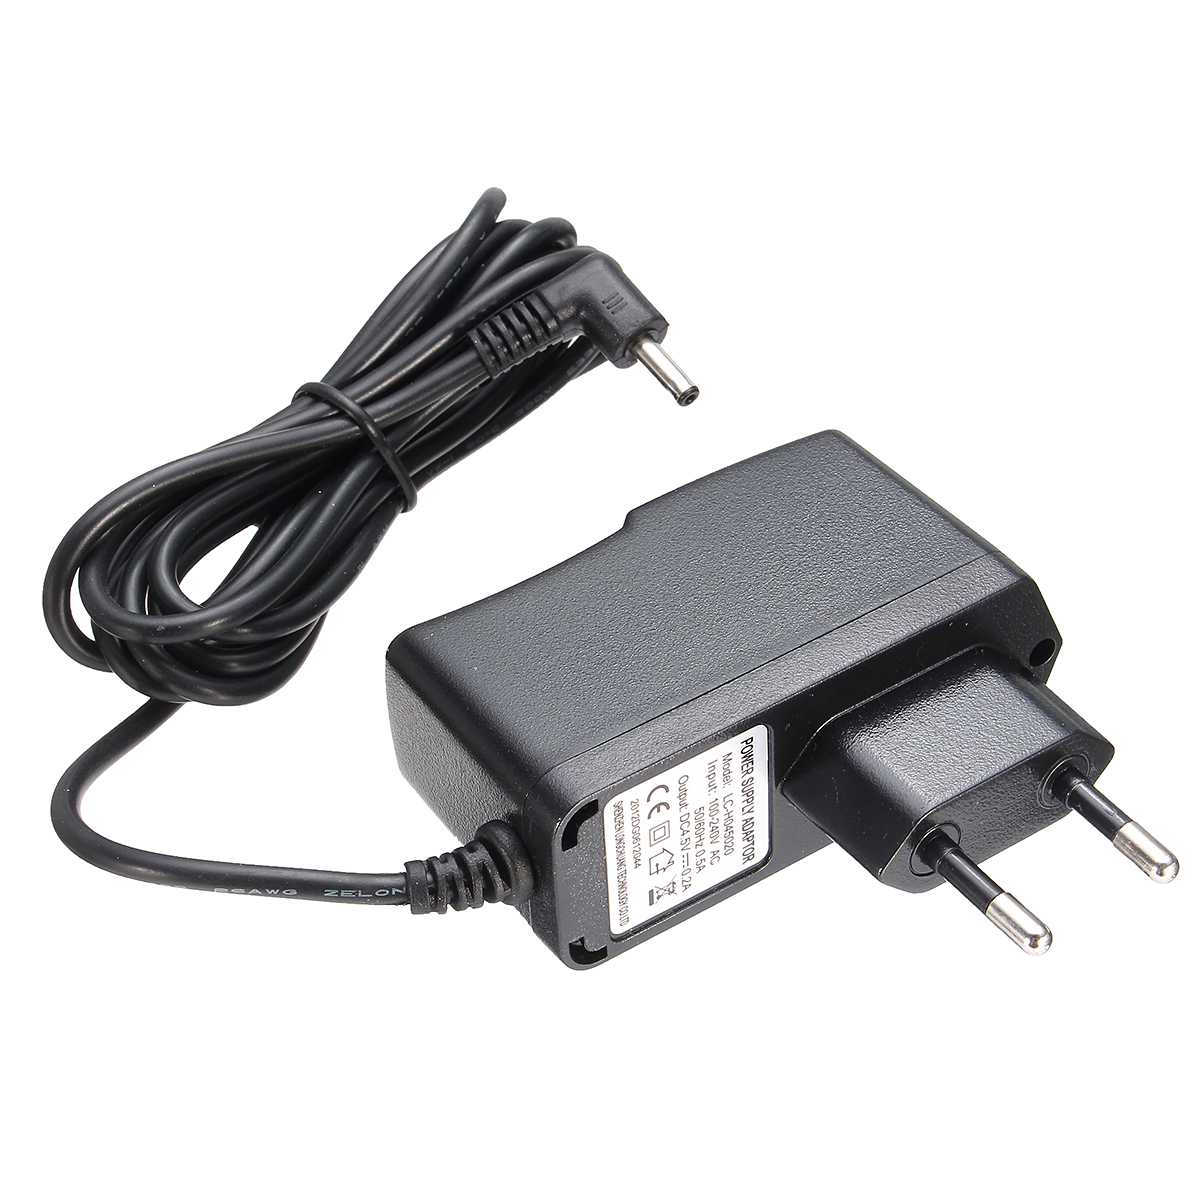 AC-100-V-240V-DC-45V-02-Adapter-USEU-Plug-Power-Supply-Charger-For-Wireless-Weather-Station-Clock-1389379-6